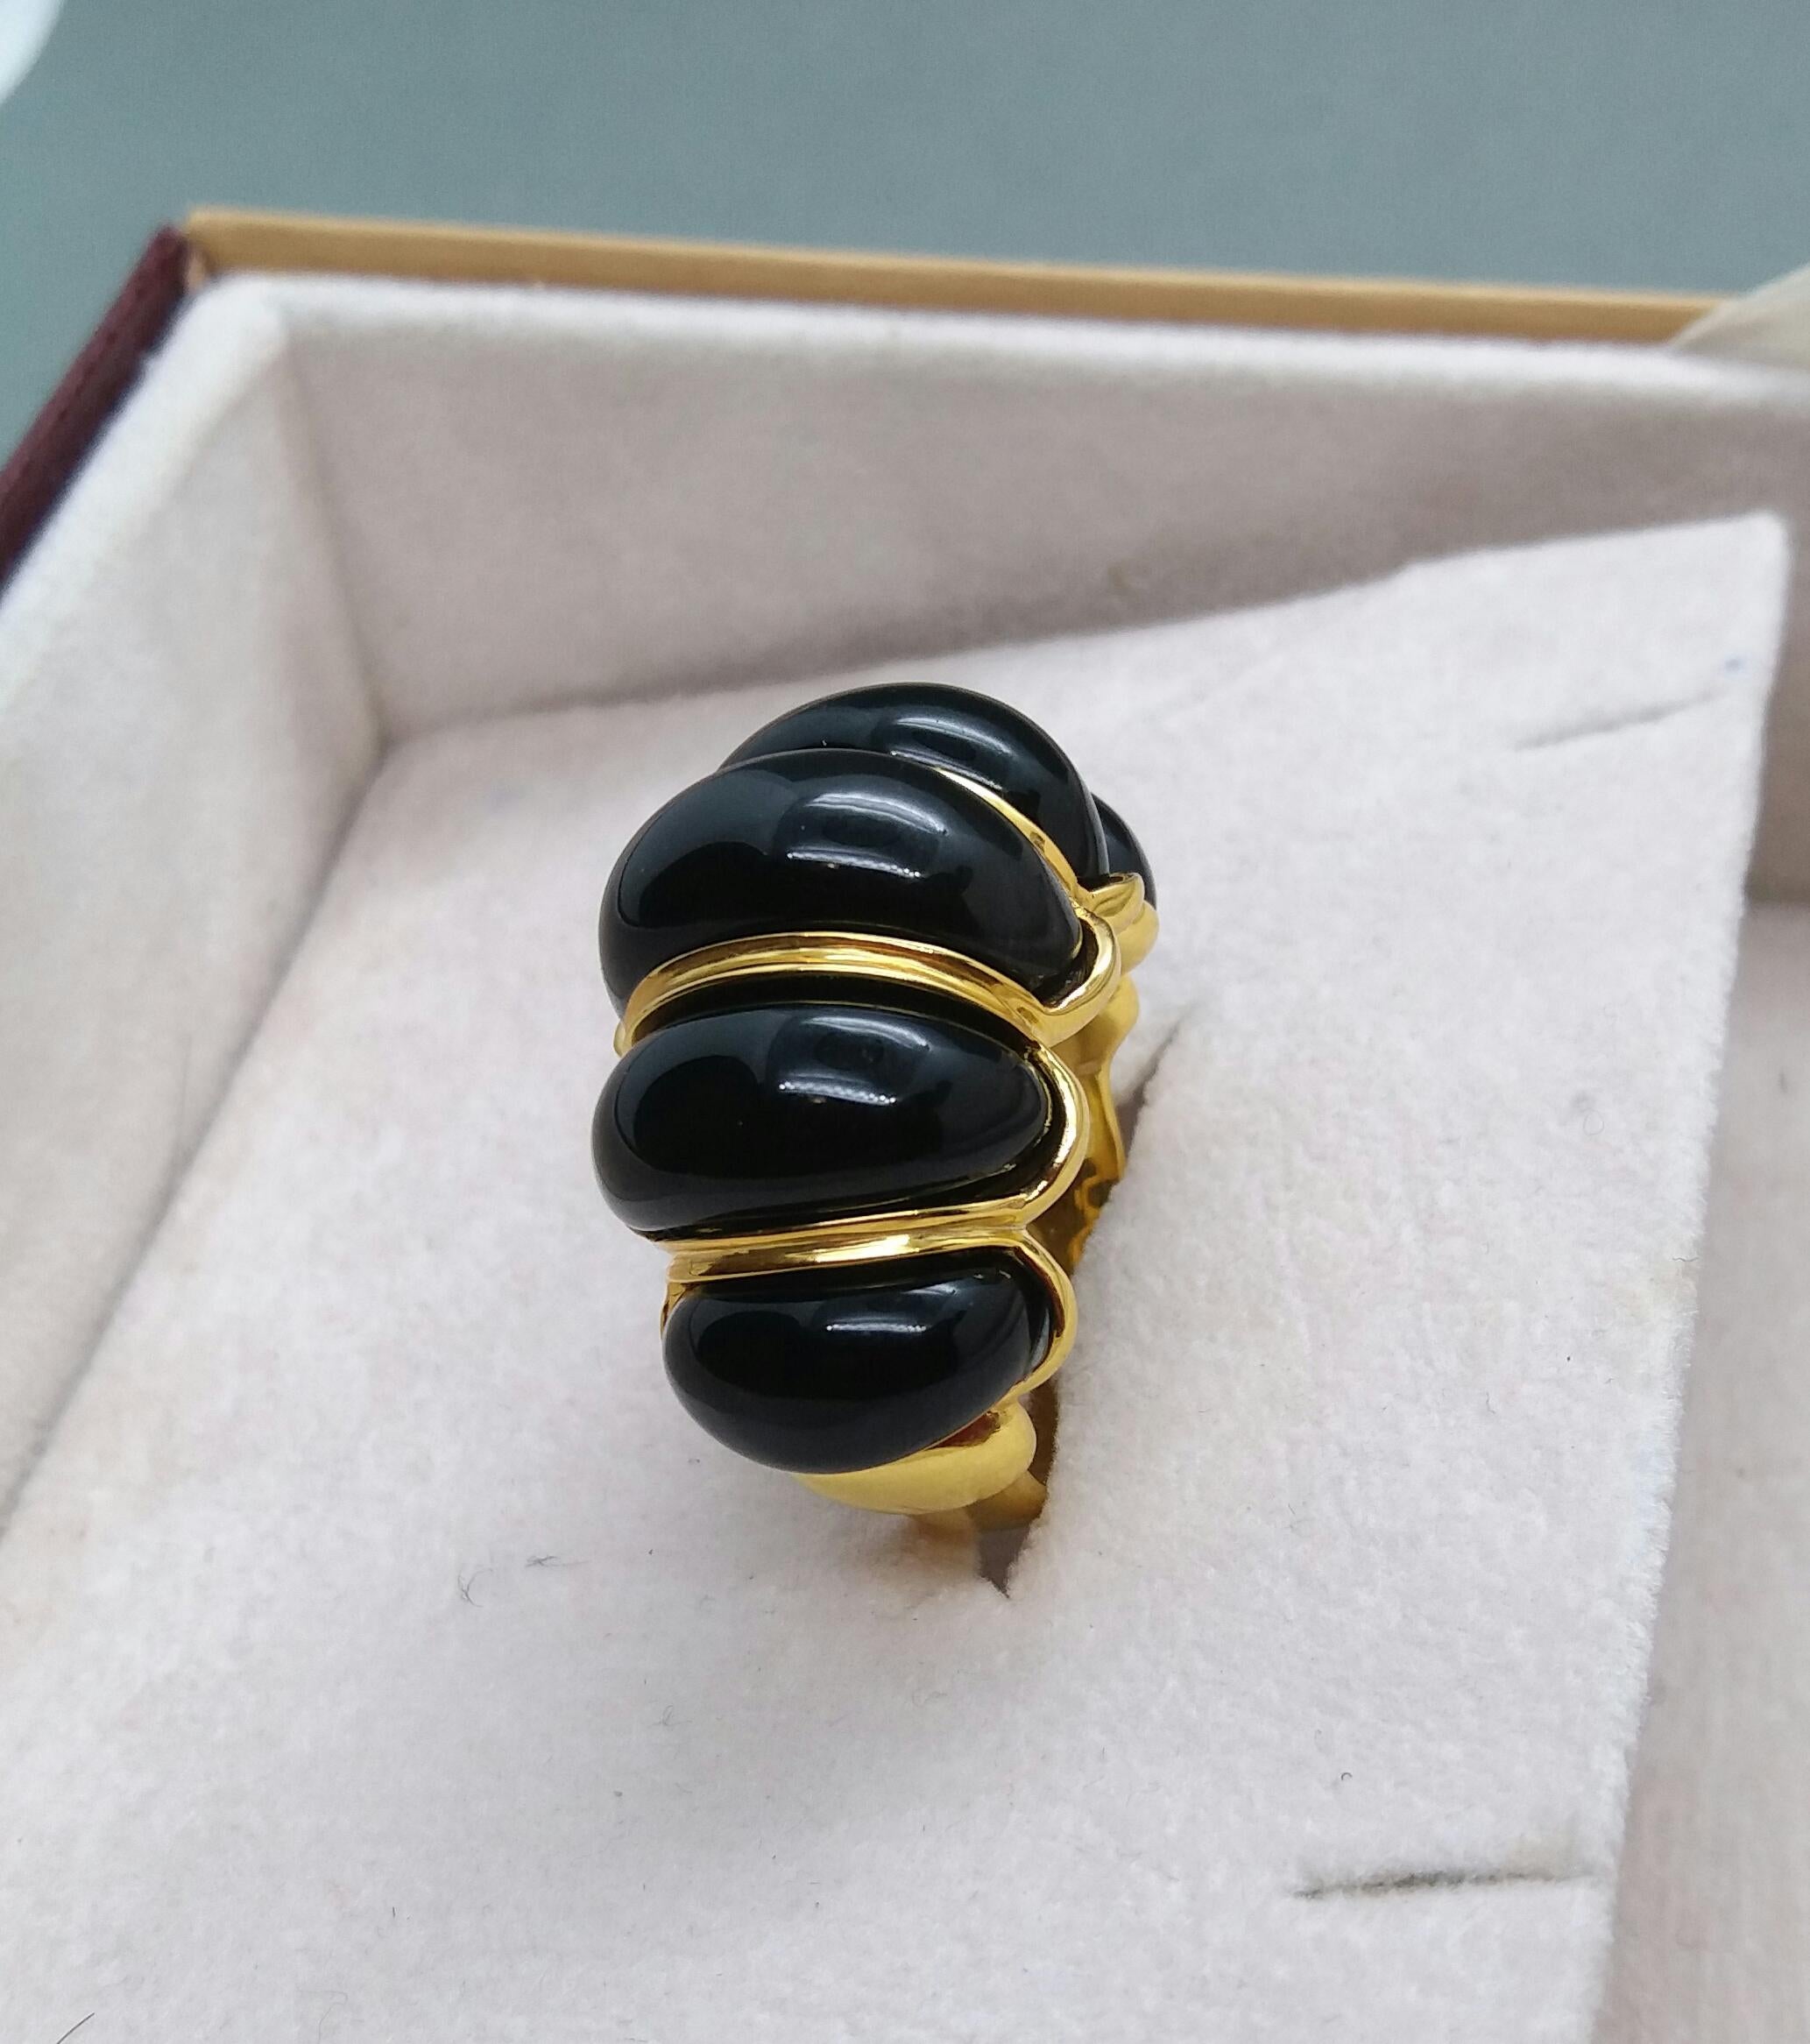 Completely handmade 14 Kt yellow gold ring including 5 domed Black Onyx domed sectors precisely set .
n 1978 our workshop started in Italy to make simple-chic Art Deco style jewellery, completely handmade and using the typical gemstones of that